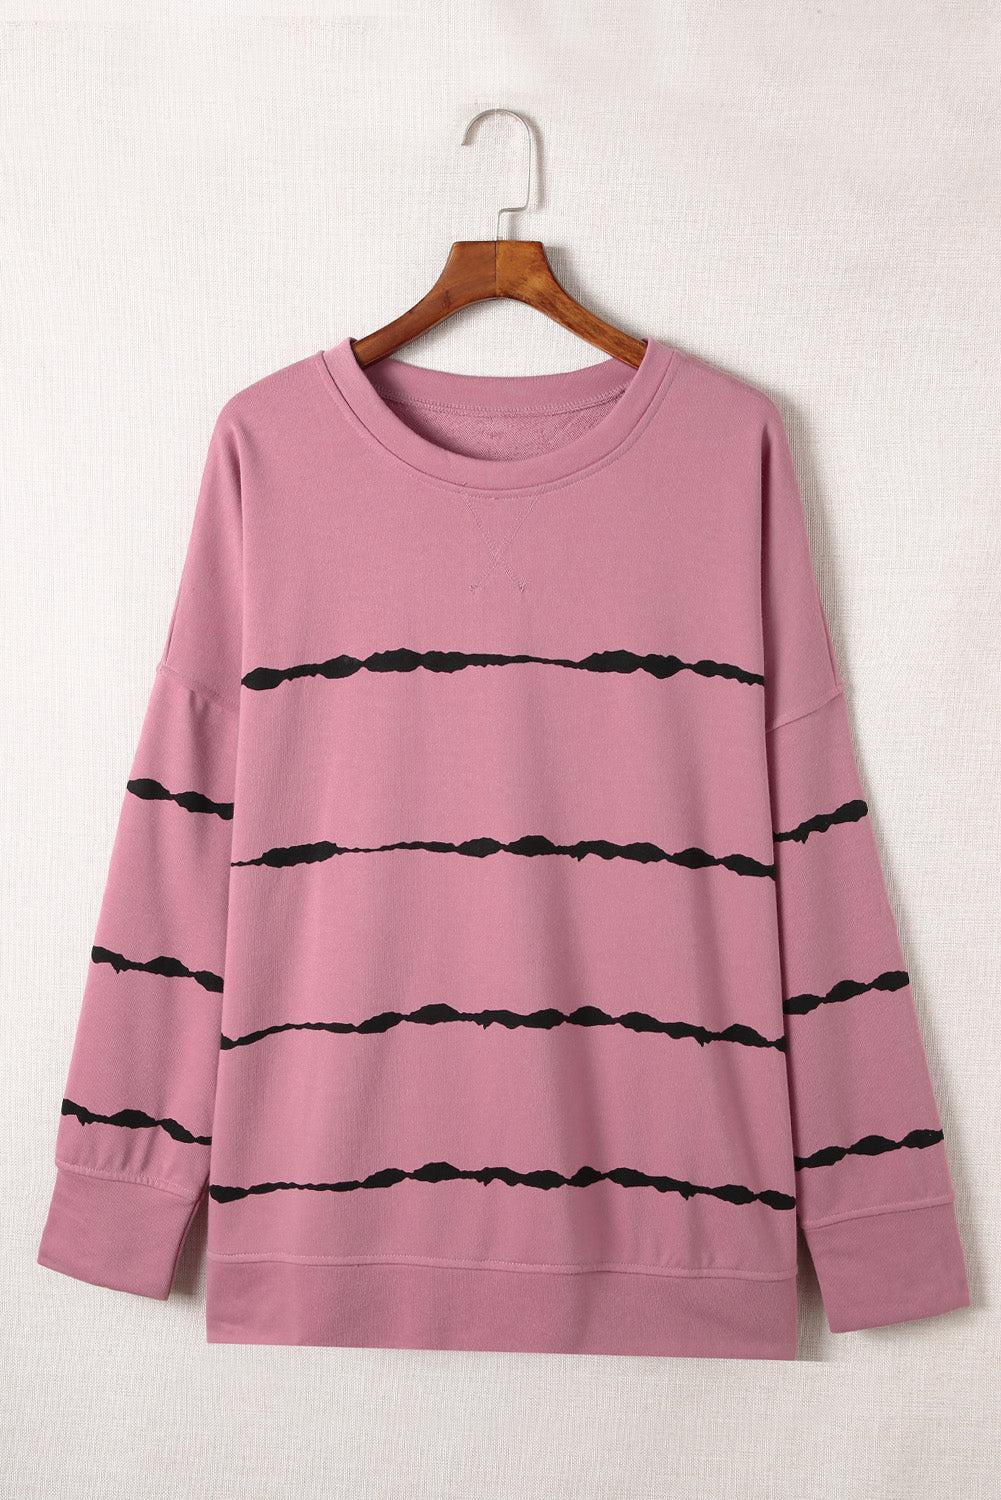 a pink shirt with black lines on it